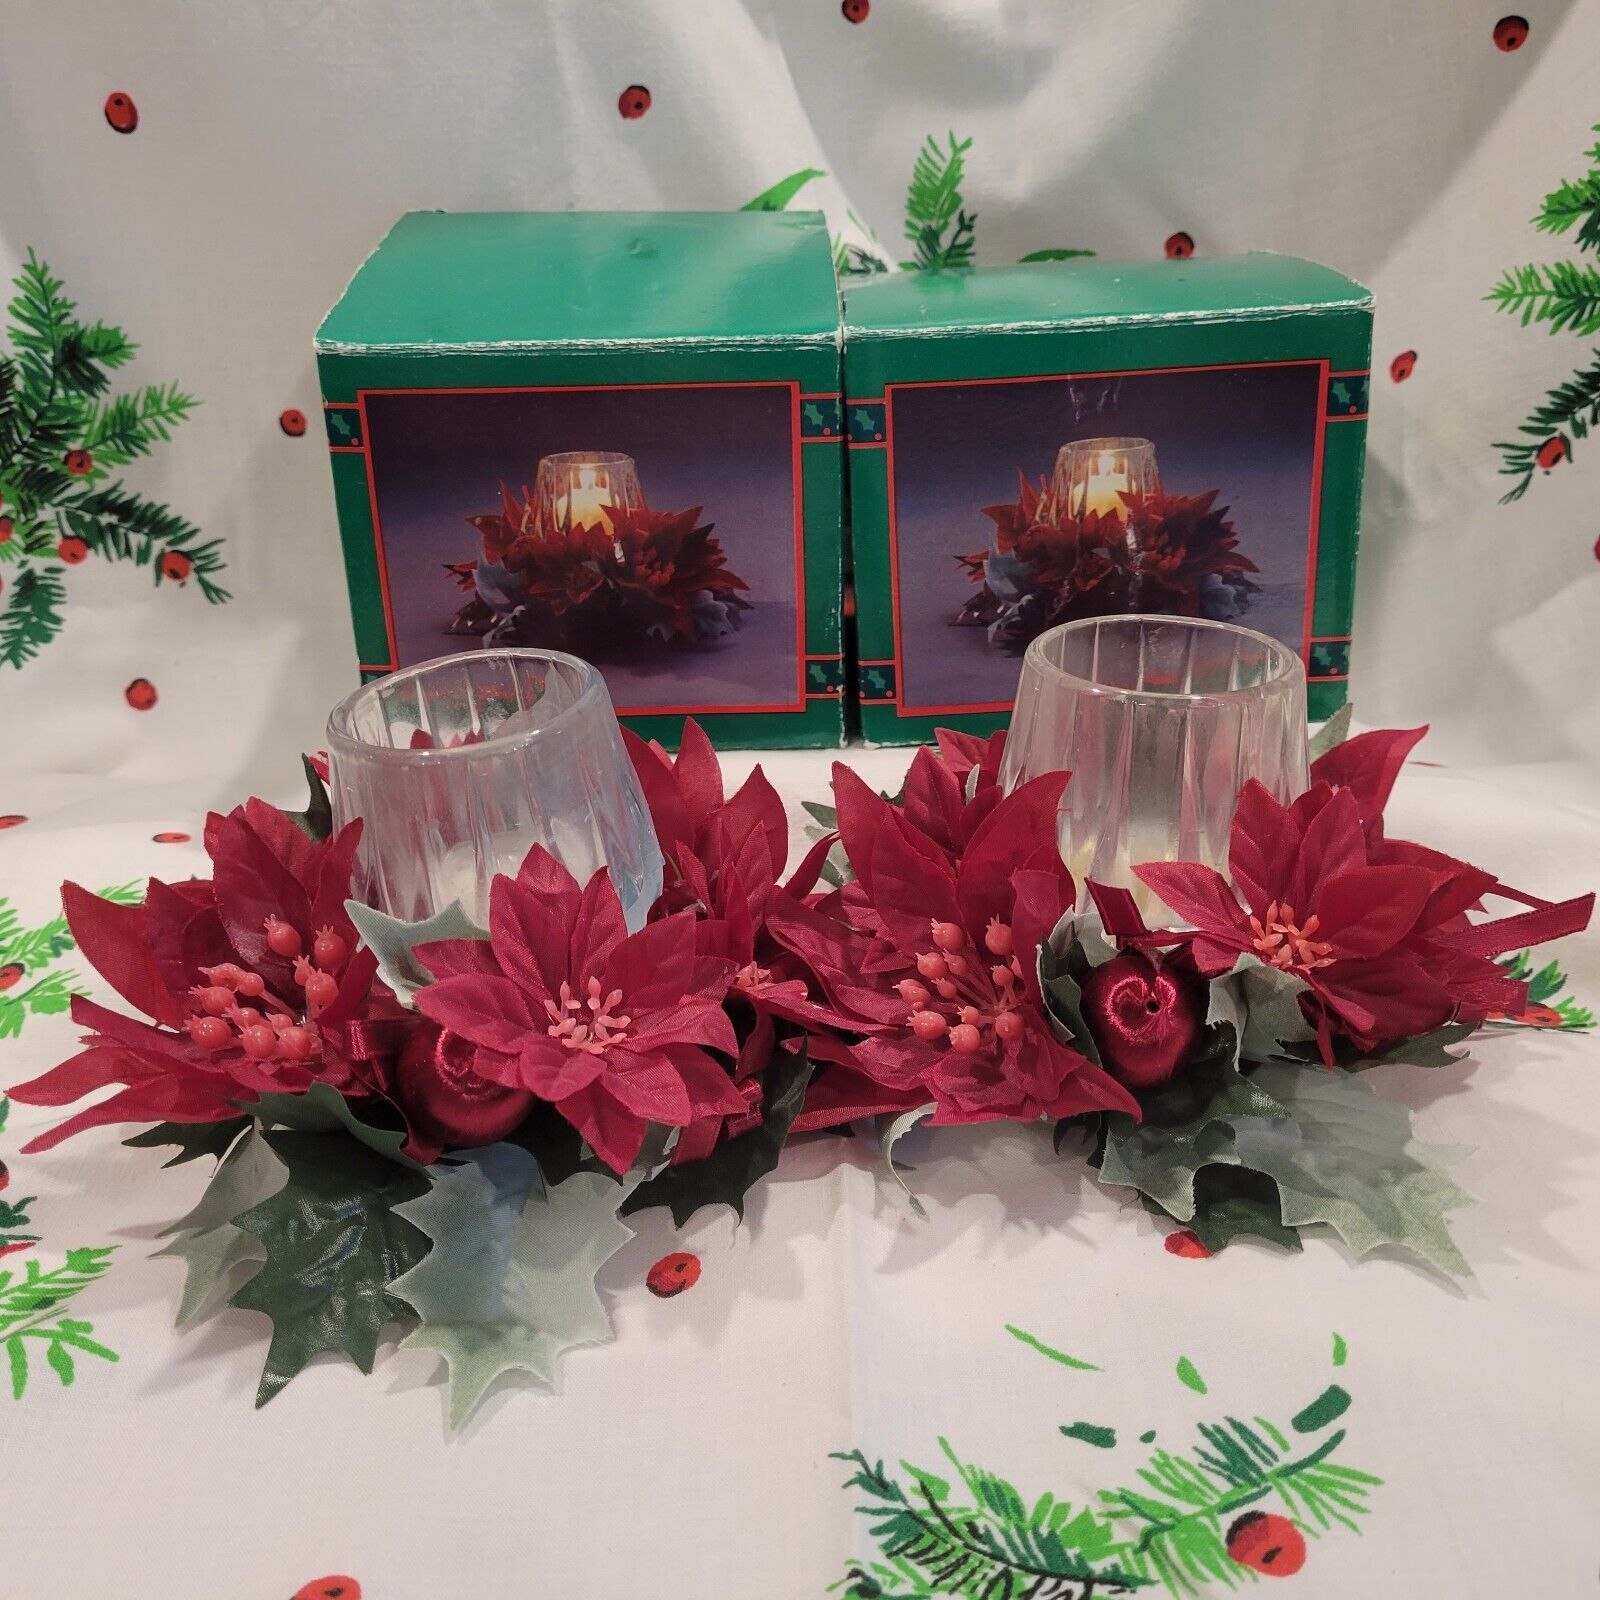 Vintage Christmas Votive Holder with Flocked Poinsettias in Box Set of 2